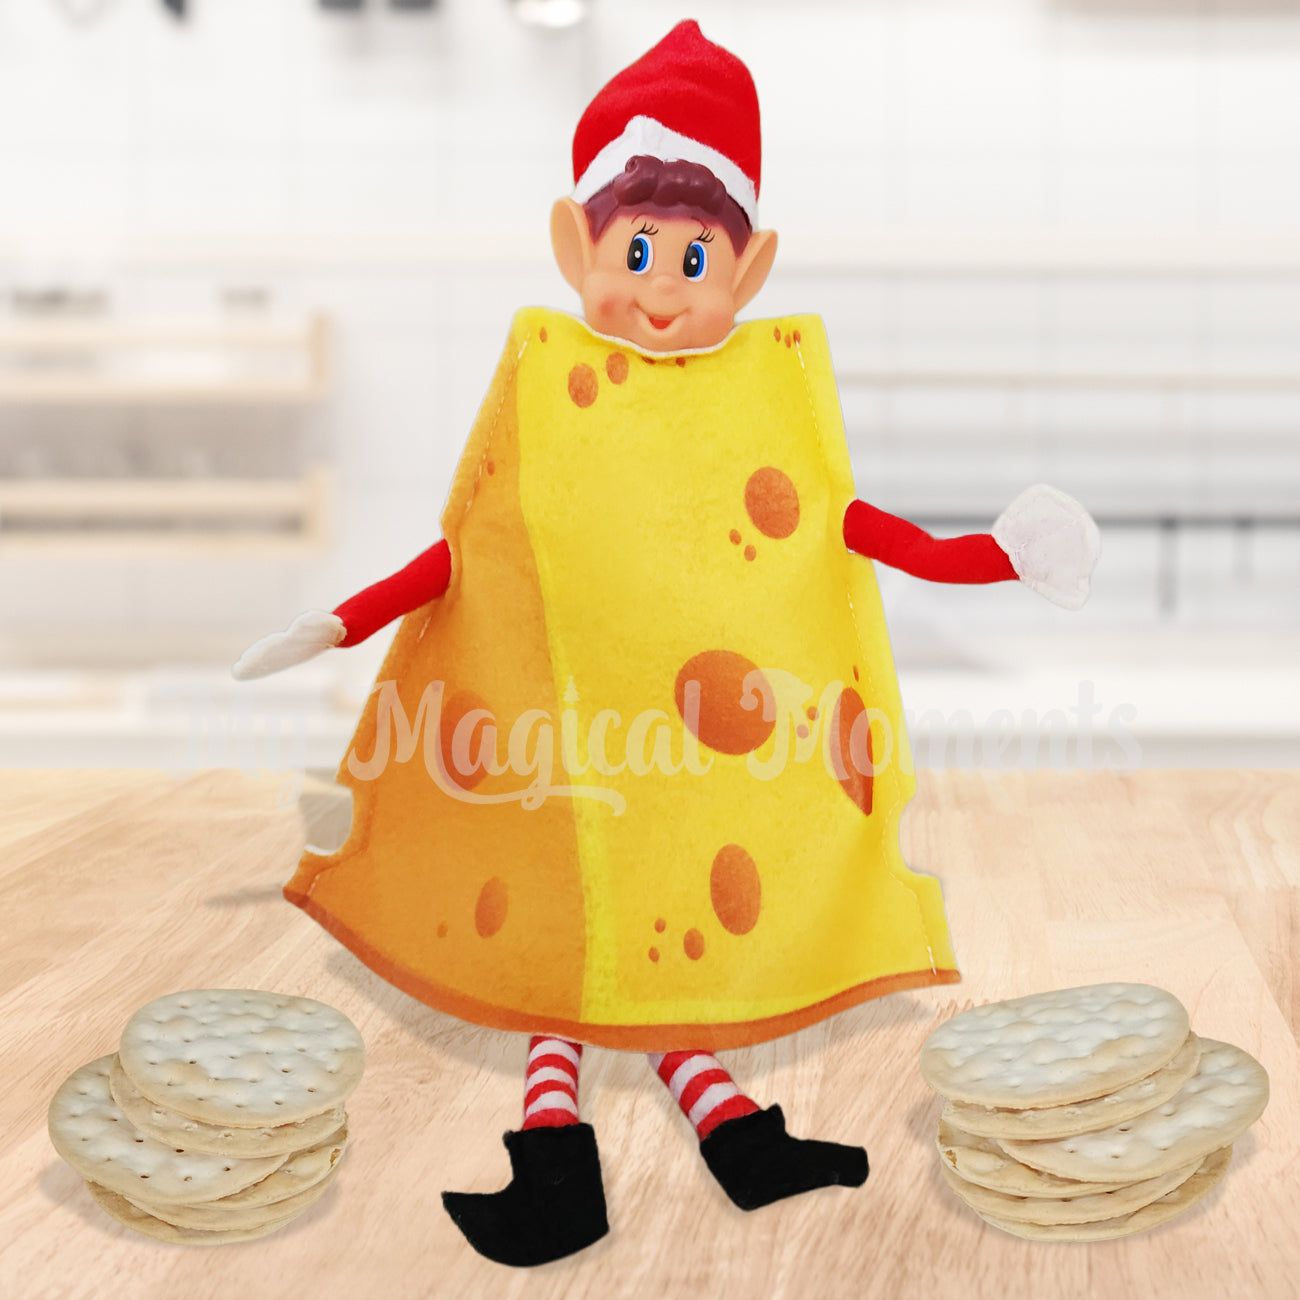 Elf wearing a cheese costume with crackers